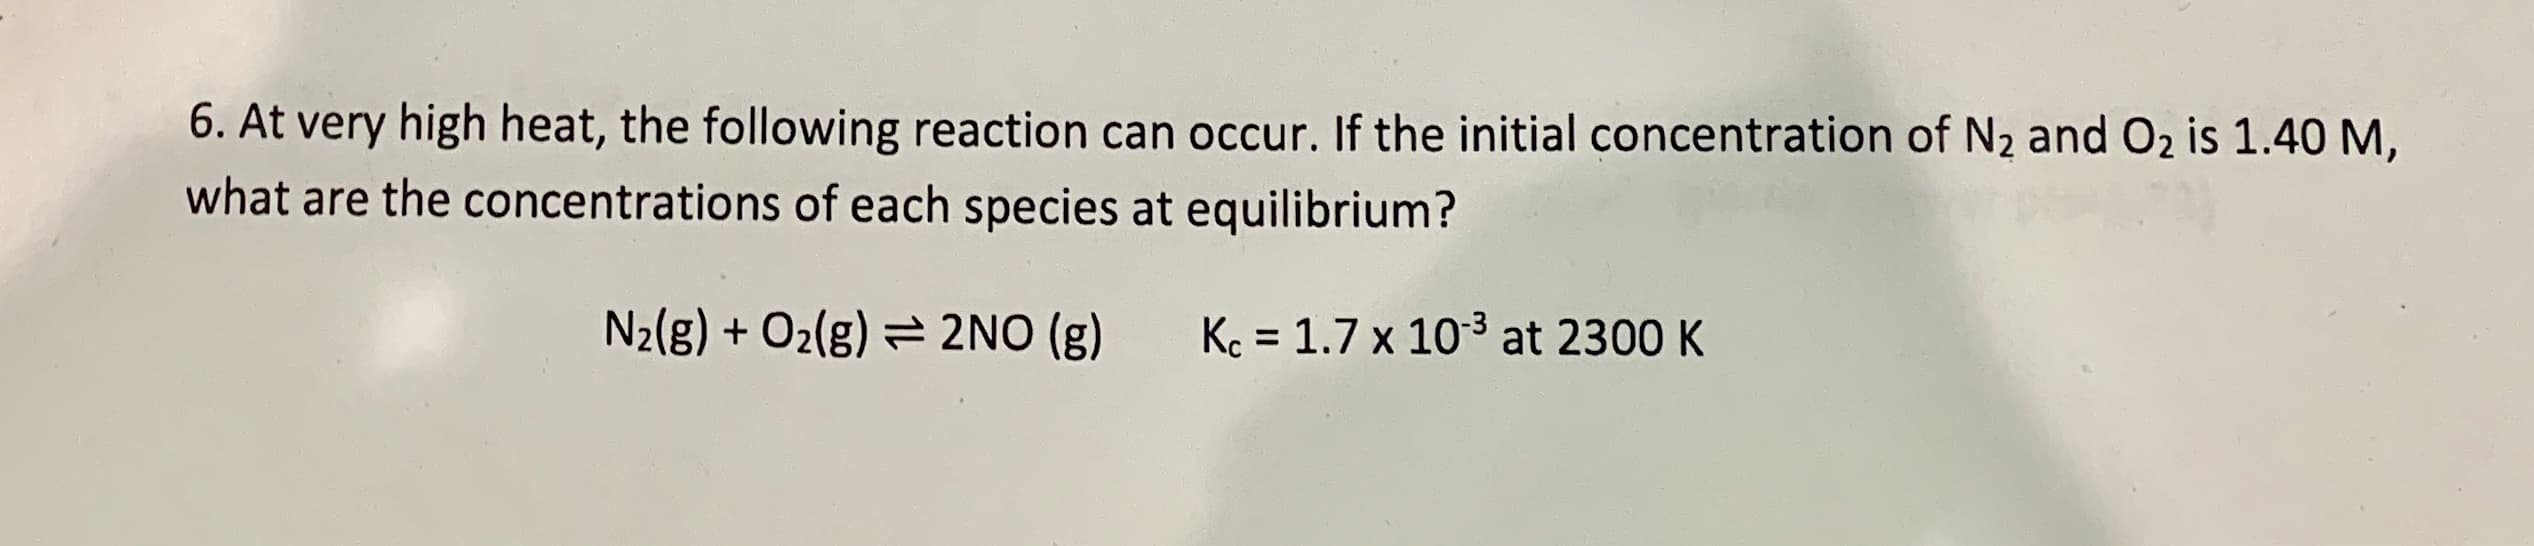 6. At very high heat, the following reaction can occur. If the initial concentration of N2 and O2 is 1.40 M,
what are the concentrations of each species at equilibrium?
N2(g) + O2(g)
2NO (g)
Kc 1.7 x 103 at 2300 K
